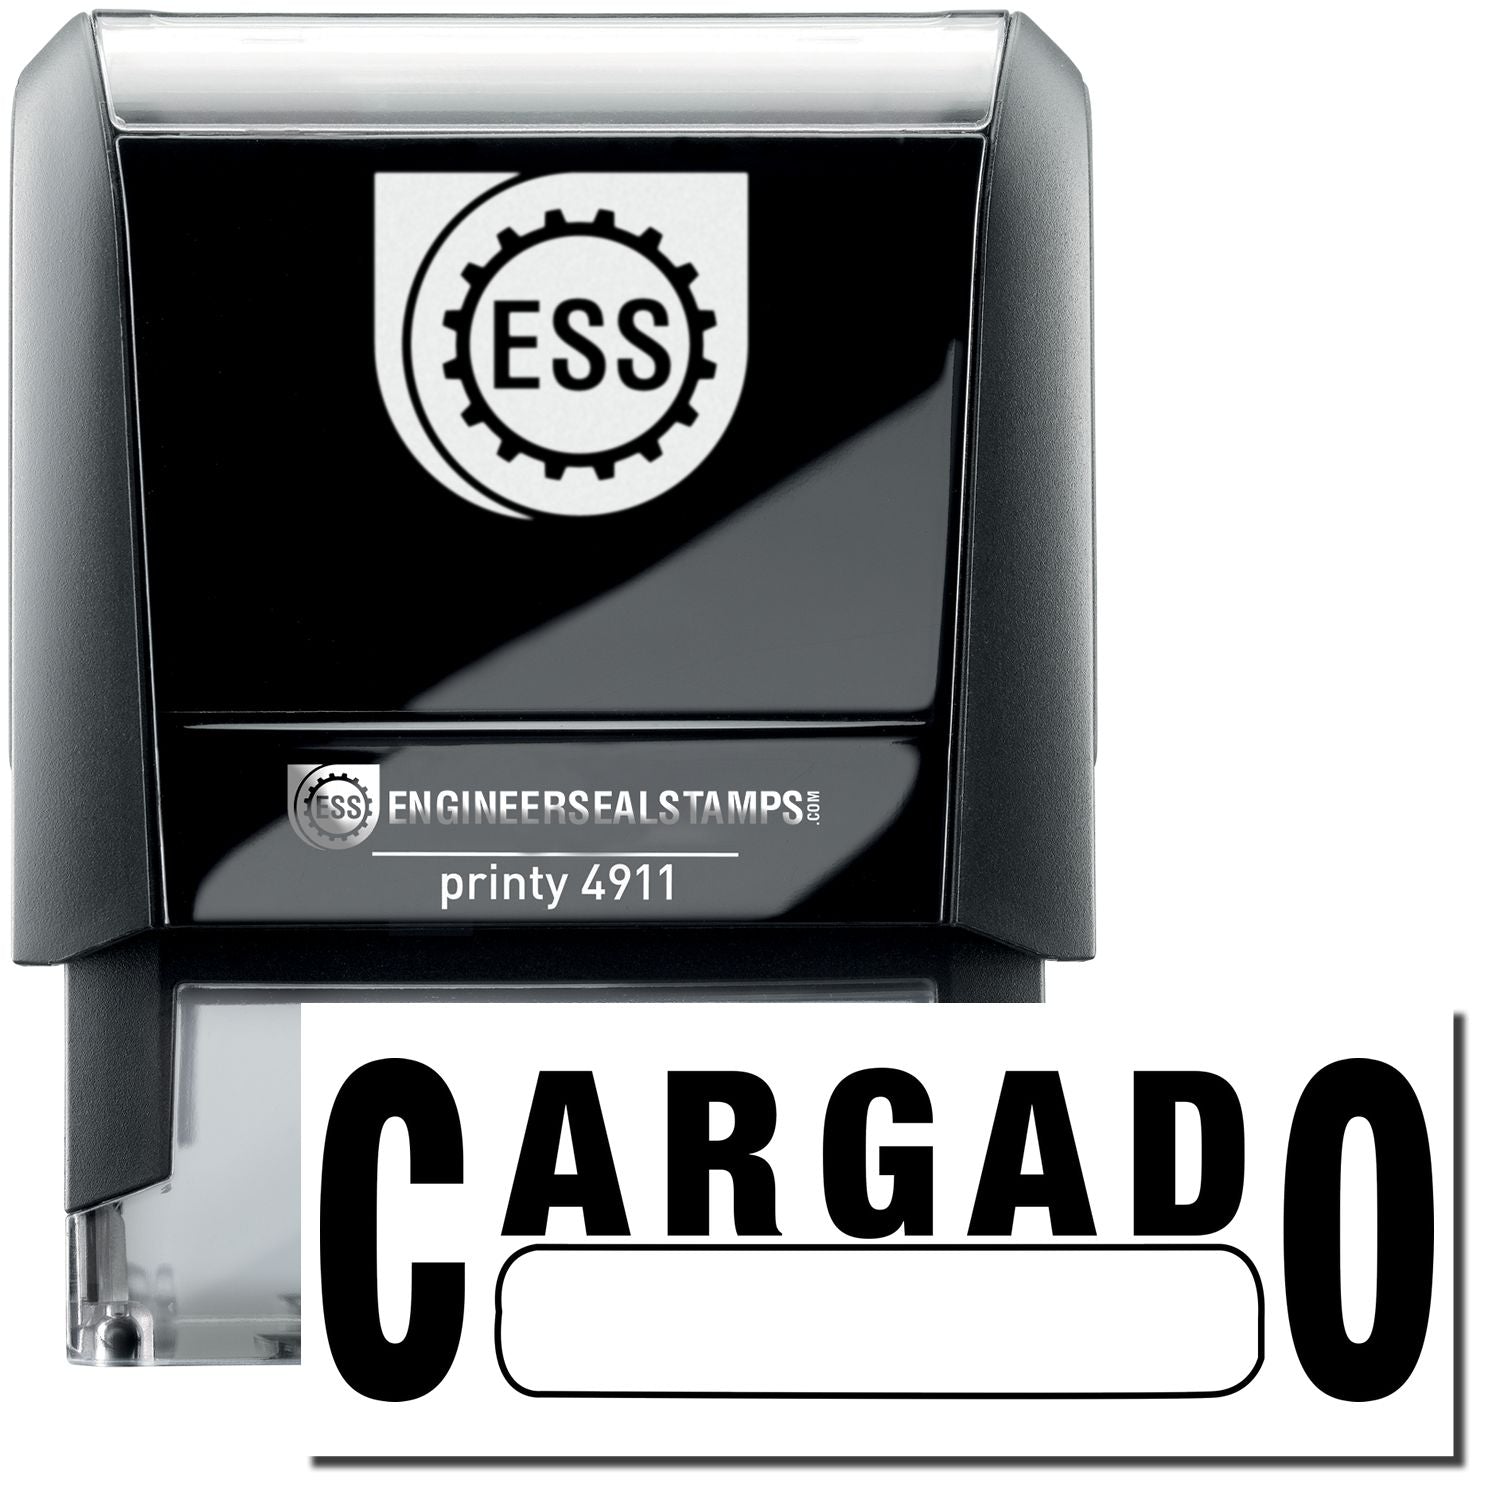 A self-inking stamp with a stamped image showing how the text "CARGADO" with a box below the text is displayed after stamping.